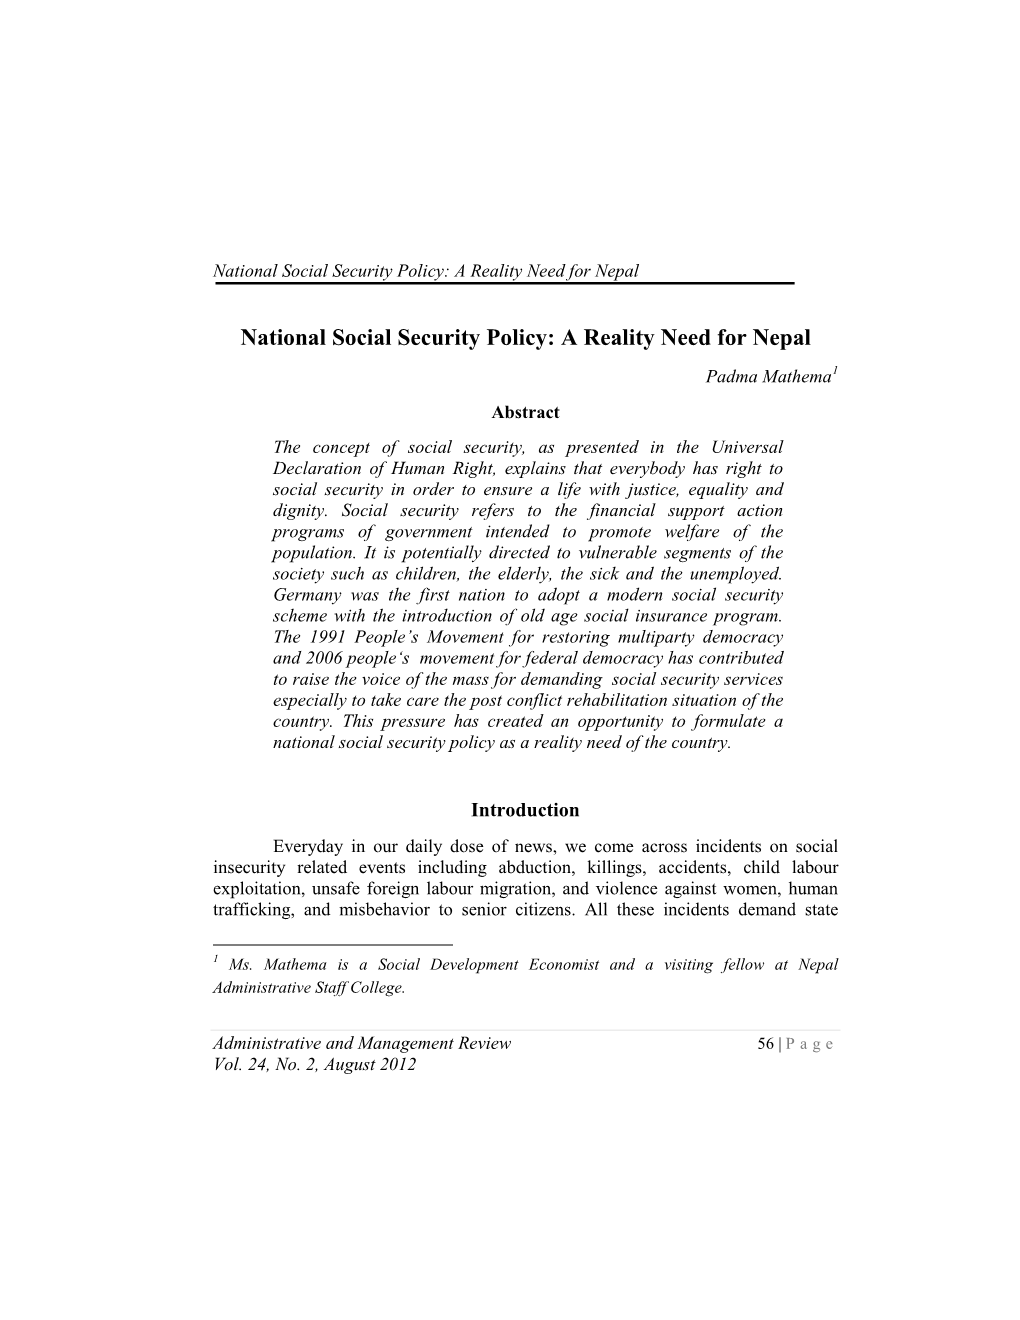 National Social Security Policy: a Reality Need for Nepal